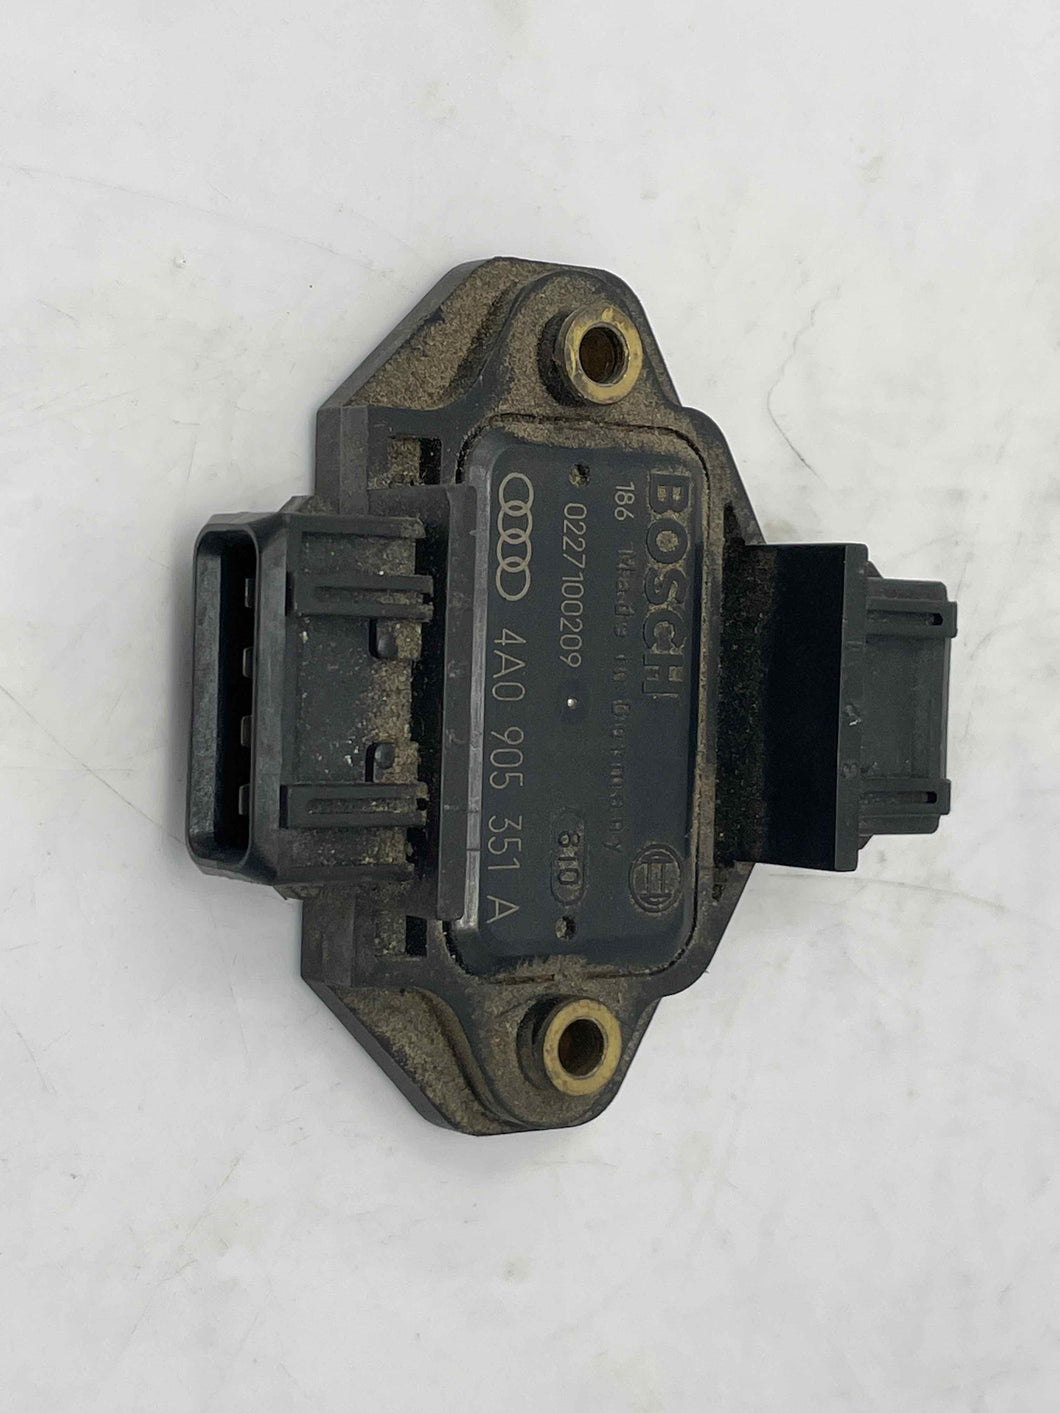 IGNITION CONTROL COMPUTER Audi 100 S6 S4 1992 92 1993 93 1994 94 - 02 - NW58939